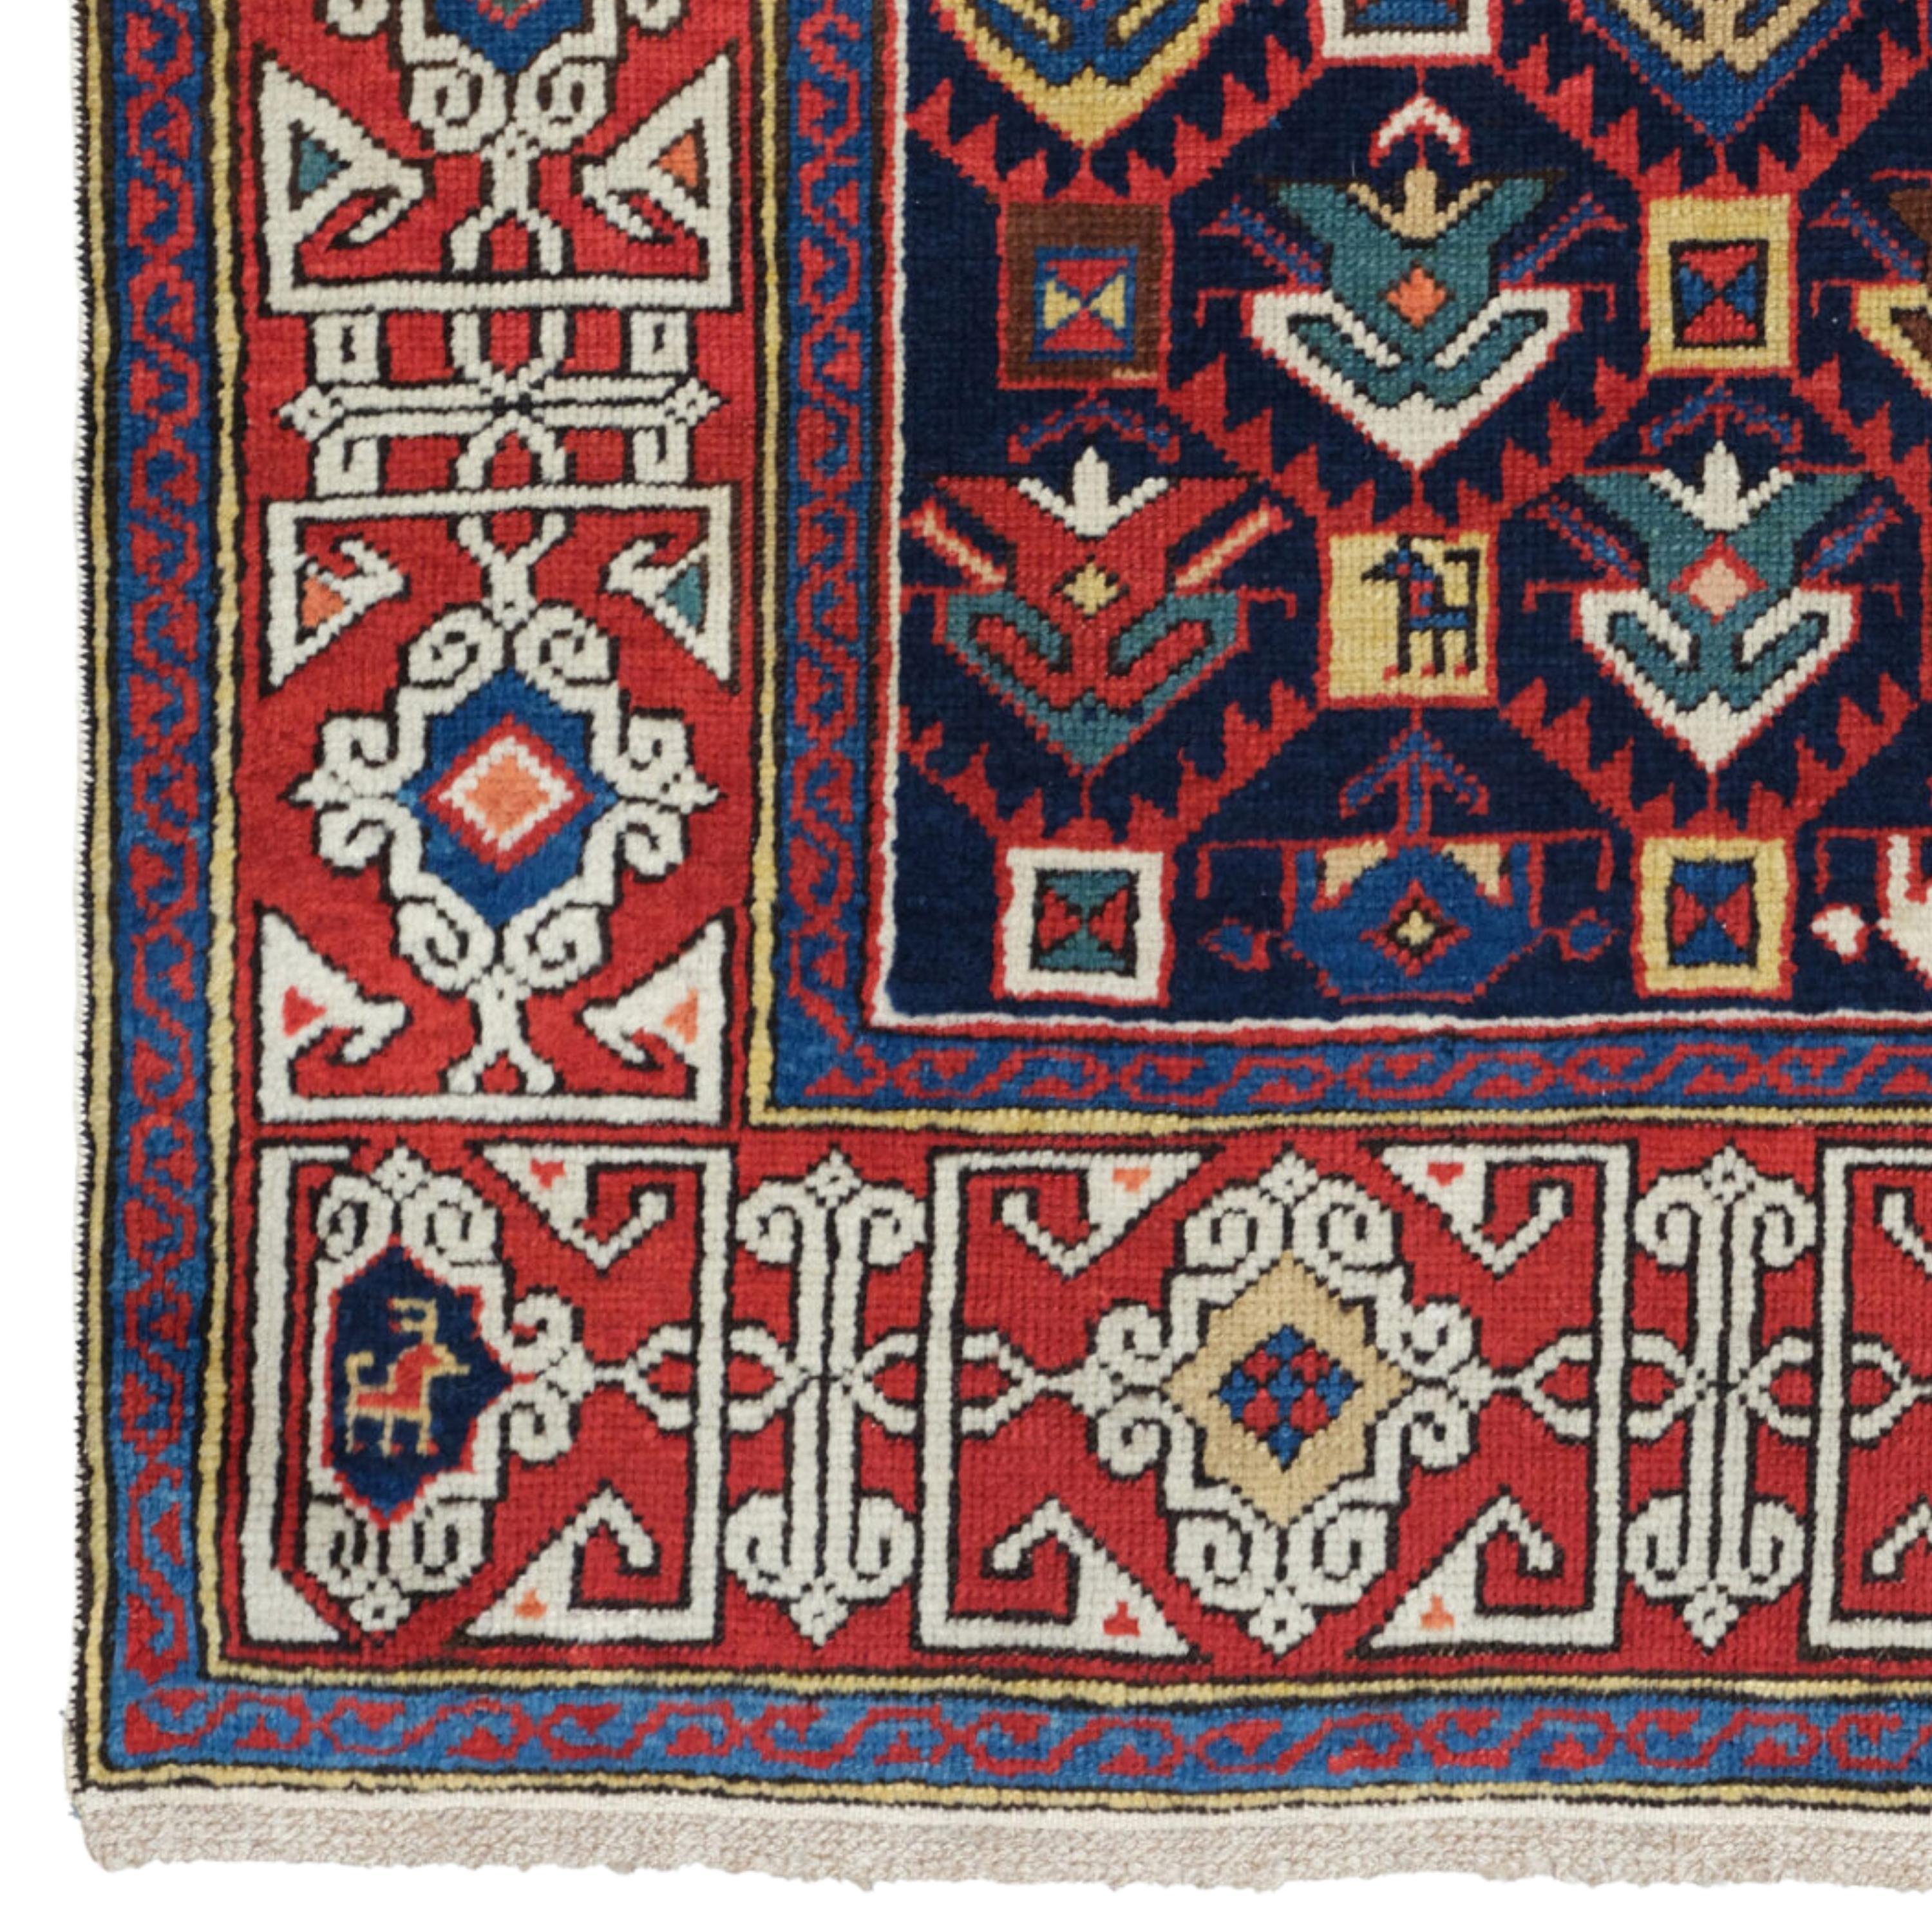 Antique Shirvan Rug
Caucasian Shirvan rug from the late 19th century Size: 91×110 cm (35,8x43,3 In)

Shirvan carpet is a handmade floor covering in the Shirvan region of Azerbaijan in the Southeastern Caucasus.
Most Shirvan carpets cannot be